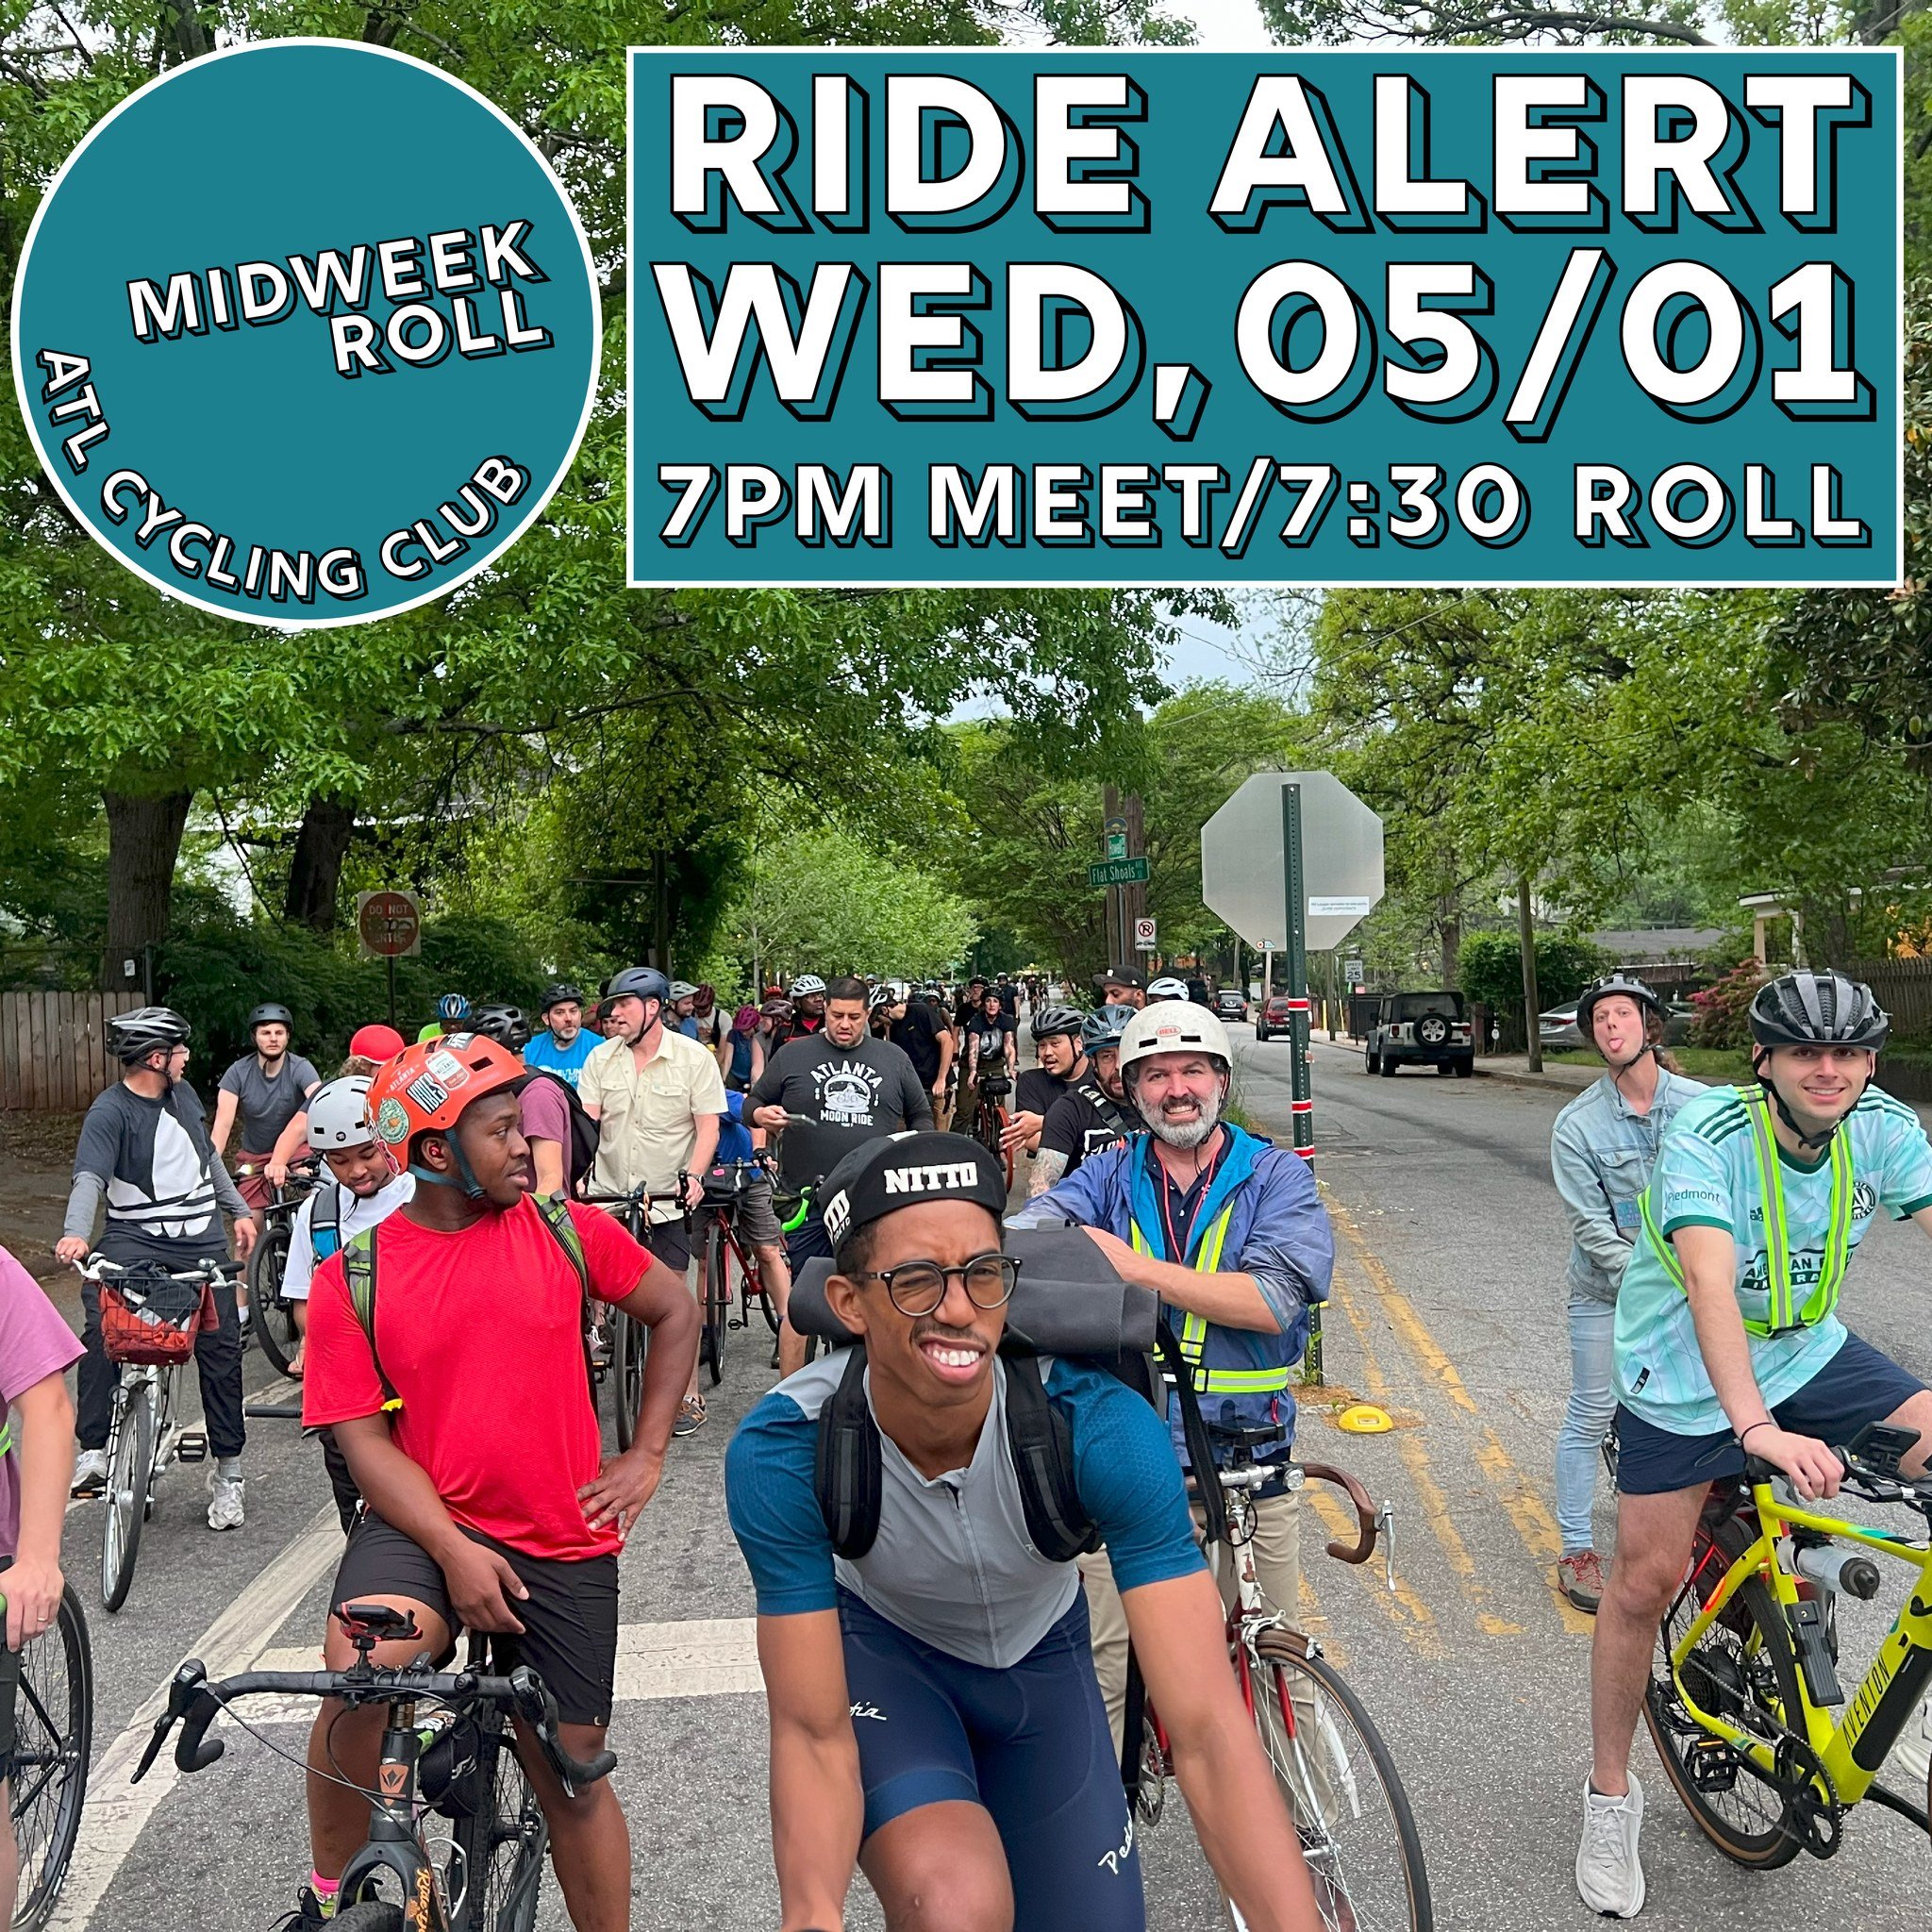 *RIDE &amp; PARTY ALERT, WED, 05/01*

Join us for our 3rd anniversary party and ride! We will have an abbreviated route, new MWR merch for sale, and a party with our rad pals @97estoria. They will be slinging some drink specials just for Midweek Roll